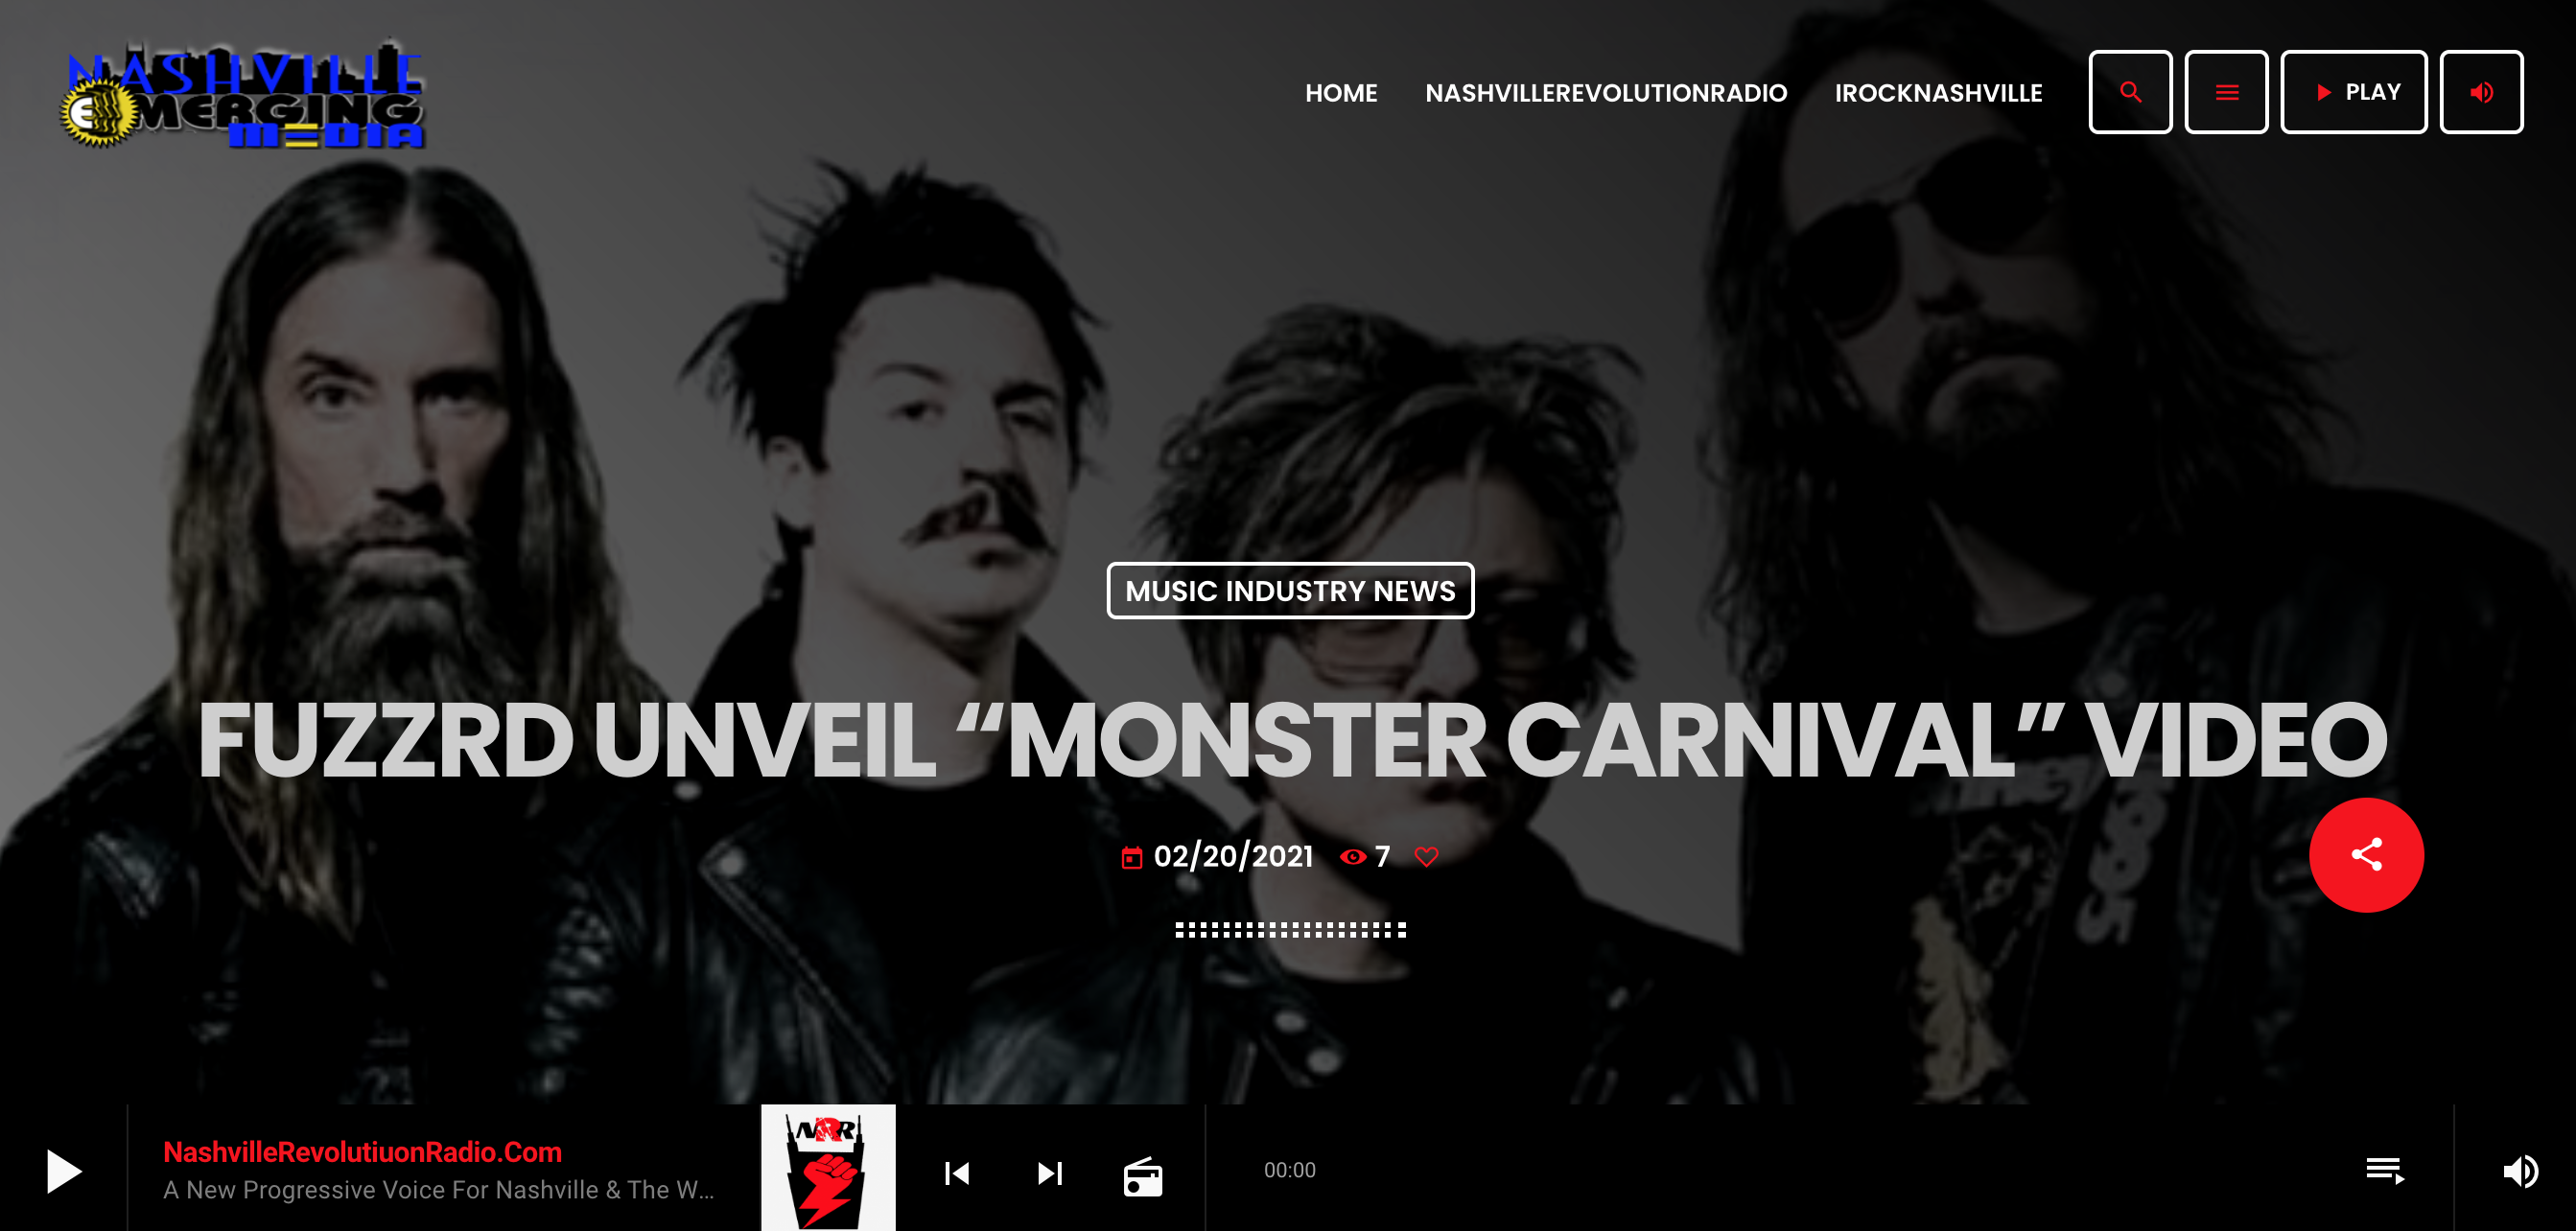 MUSIC INDUSTRY NEWS FUZZRD UNVEIL “MONSTER CARNIVAL” VIDEO